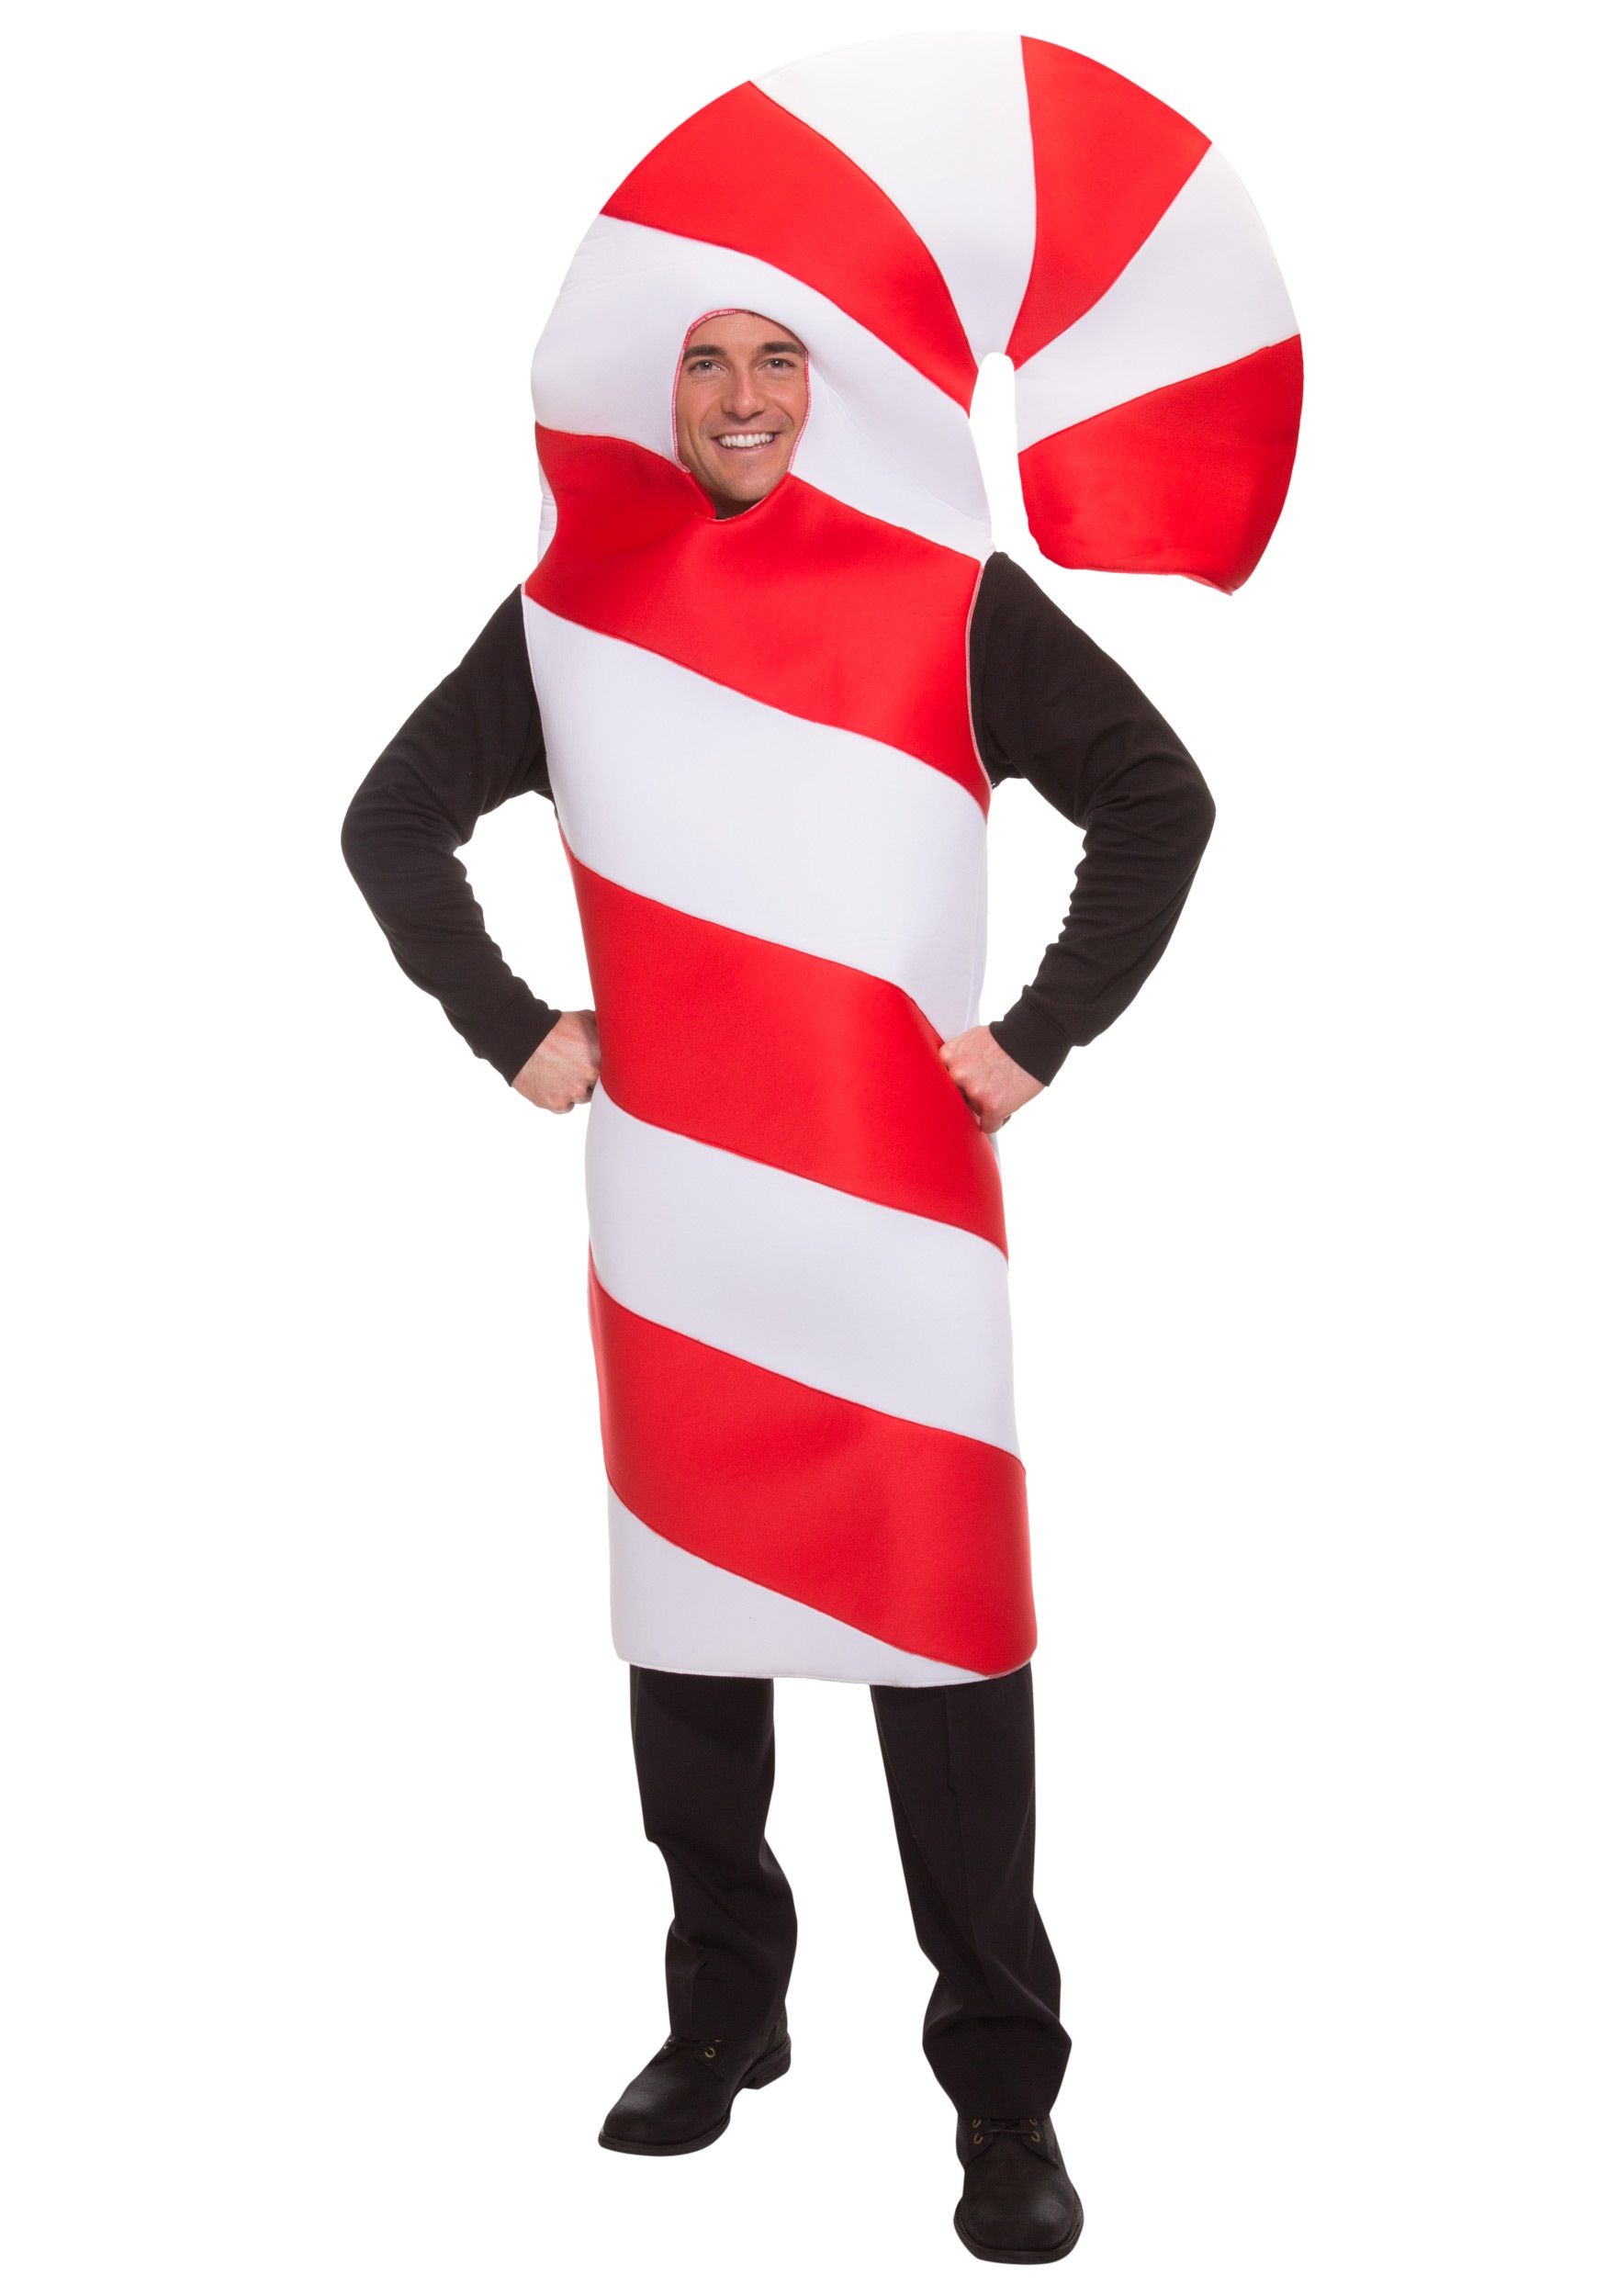 Photos - Fancy Dress Candy FUN Costumes  Cane Adult Costume Red/White FUN2679AD 